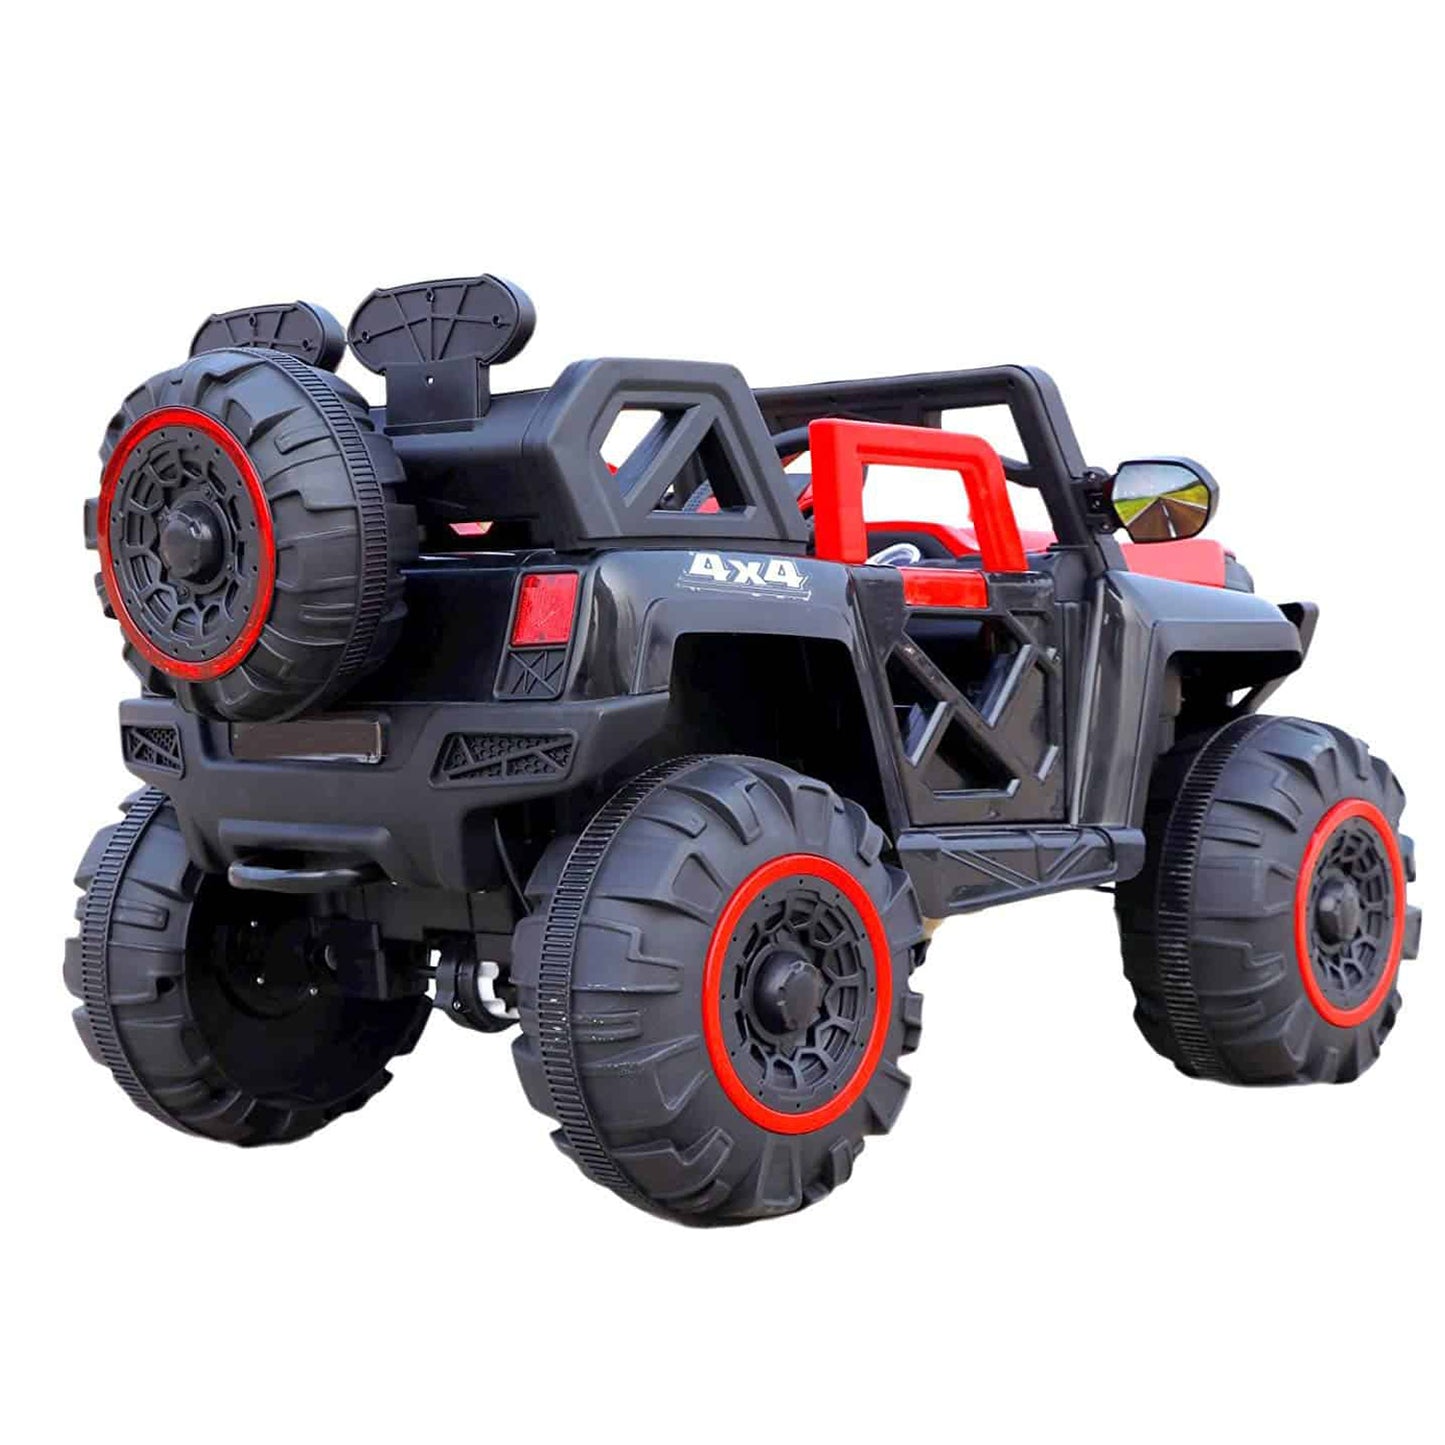 Fliptoy™ Kids ride on 2188 jeep Rechargeable Battery Operated 4x4 Drive